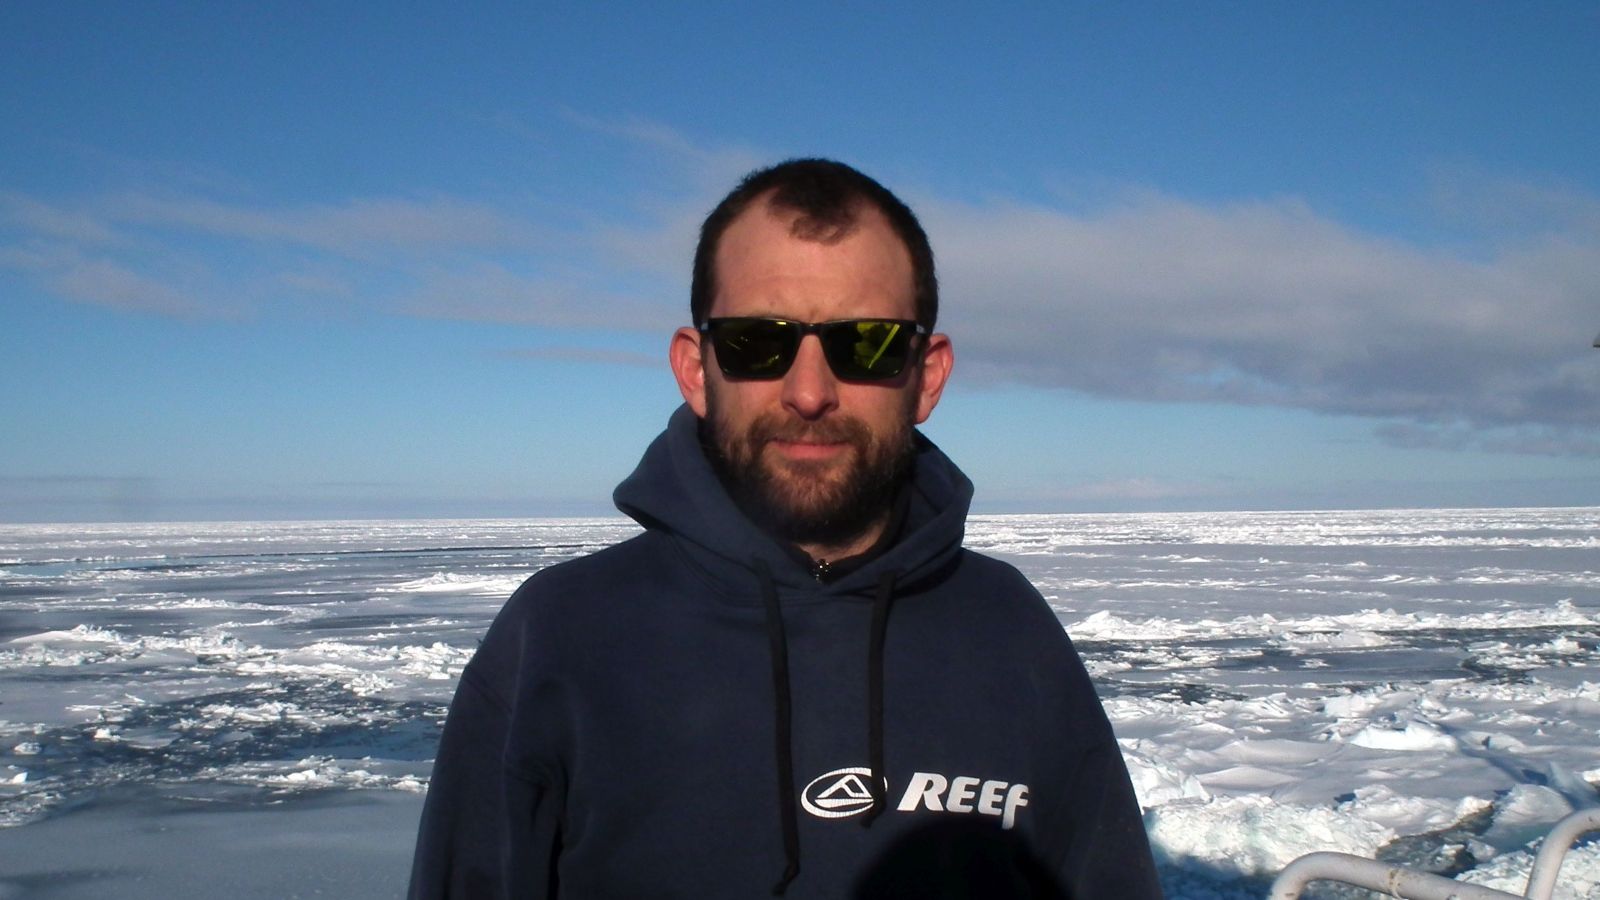 Head and shoulders portrait of Flavio Mayorga. Flavio wears a navy blue hoodie and sunglasses, sea ice in the background.